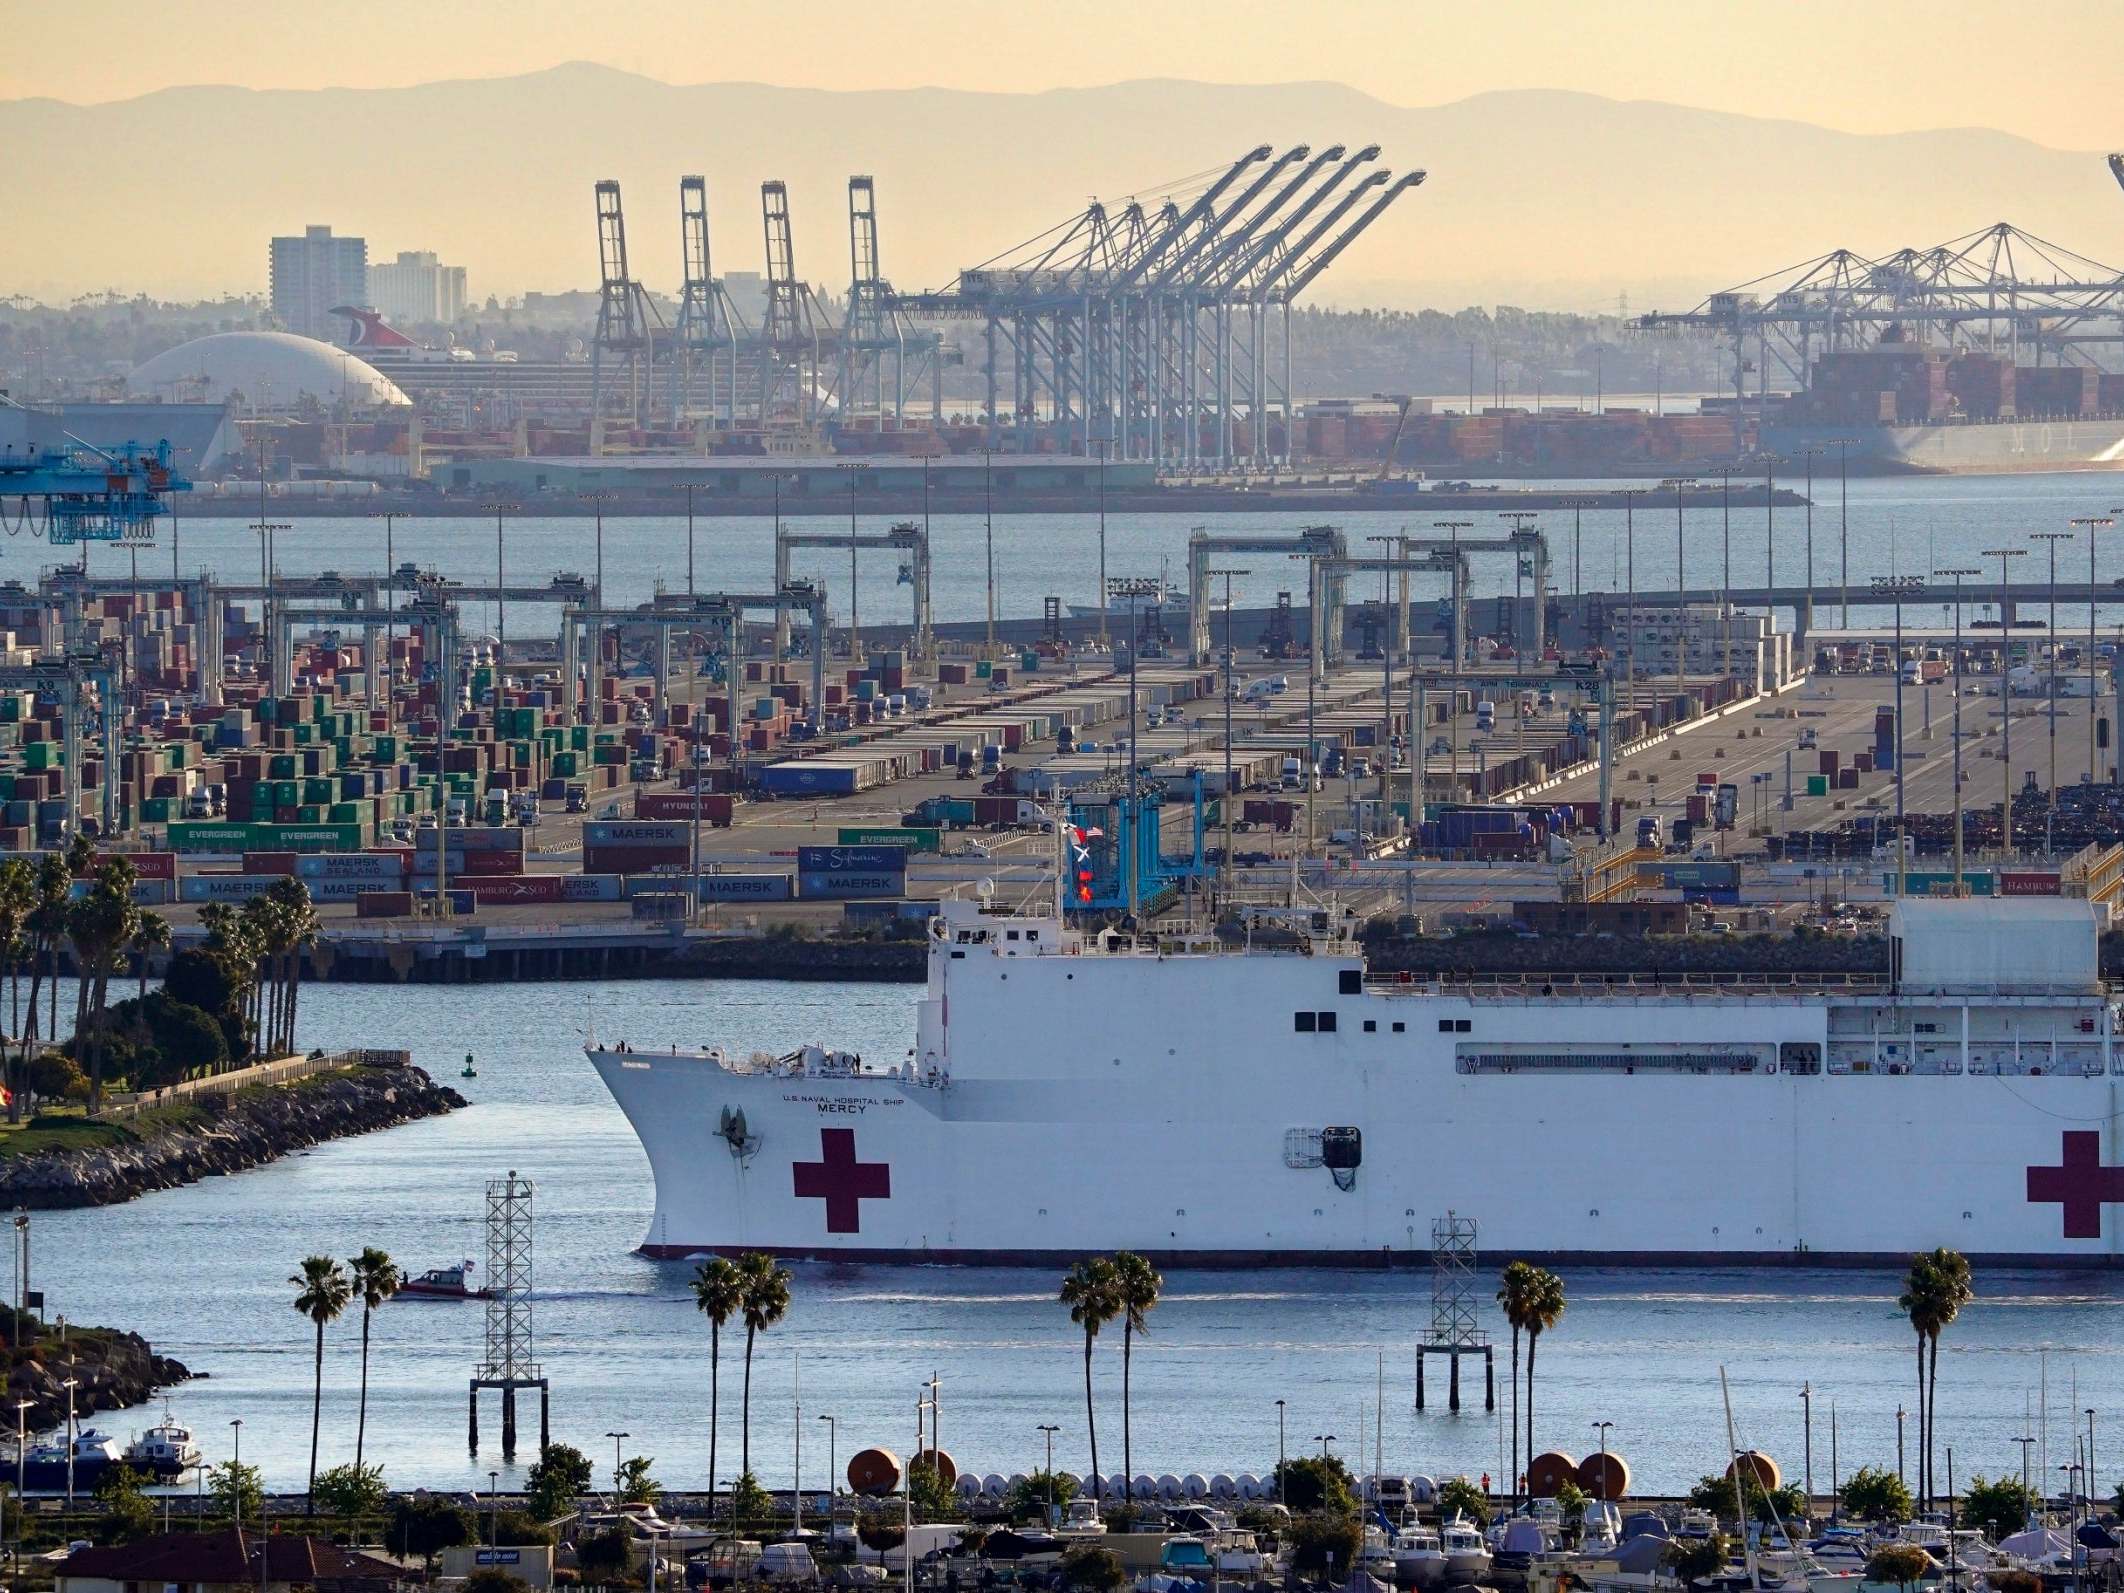 The USNS Mercy entering the Port of Los Angeles, where the train crash happened this week